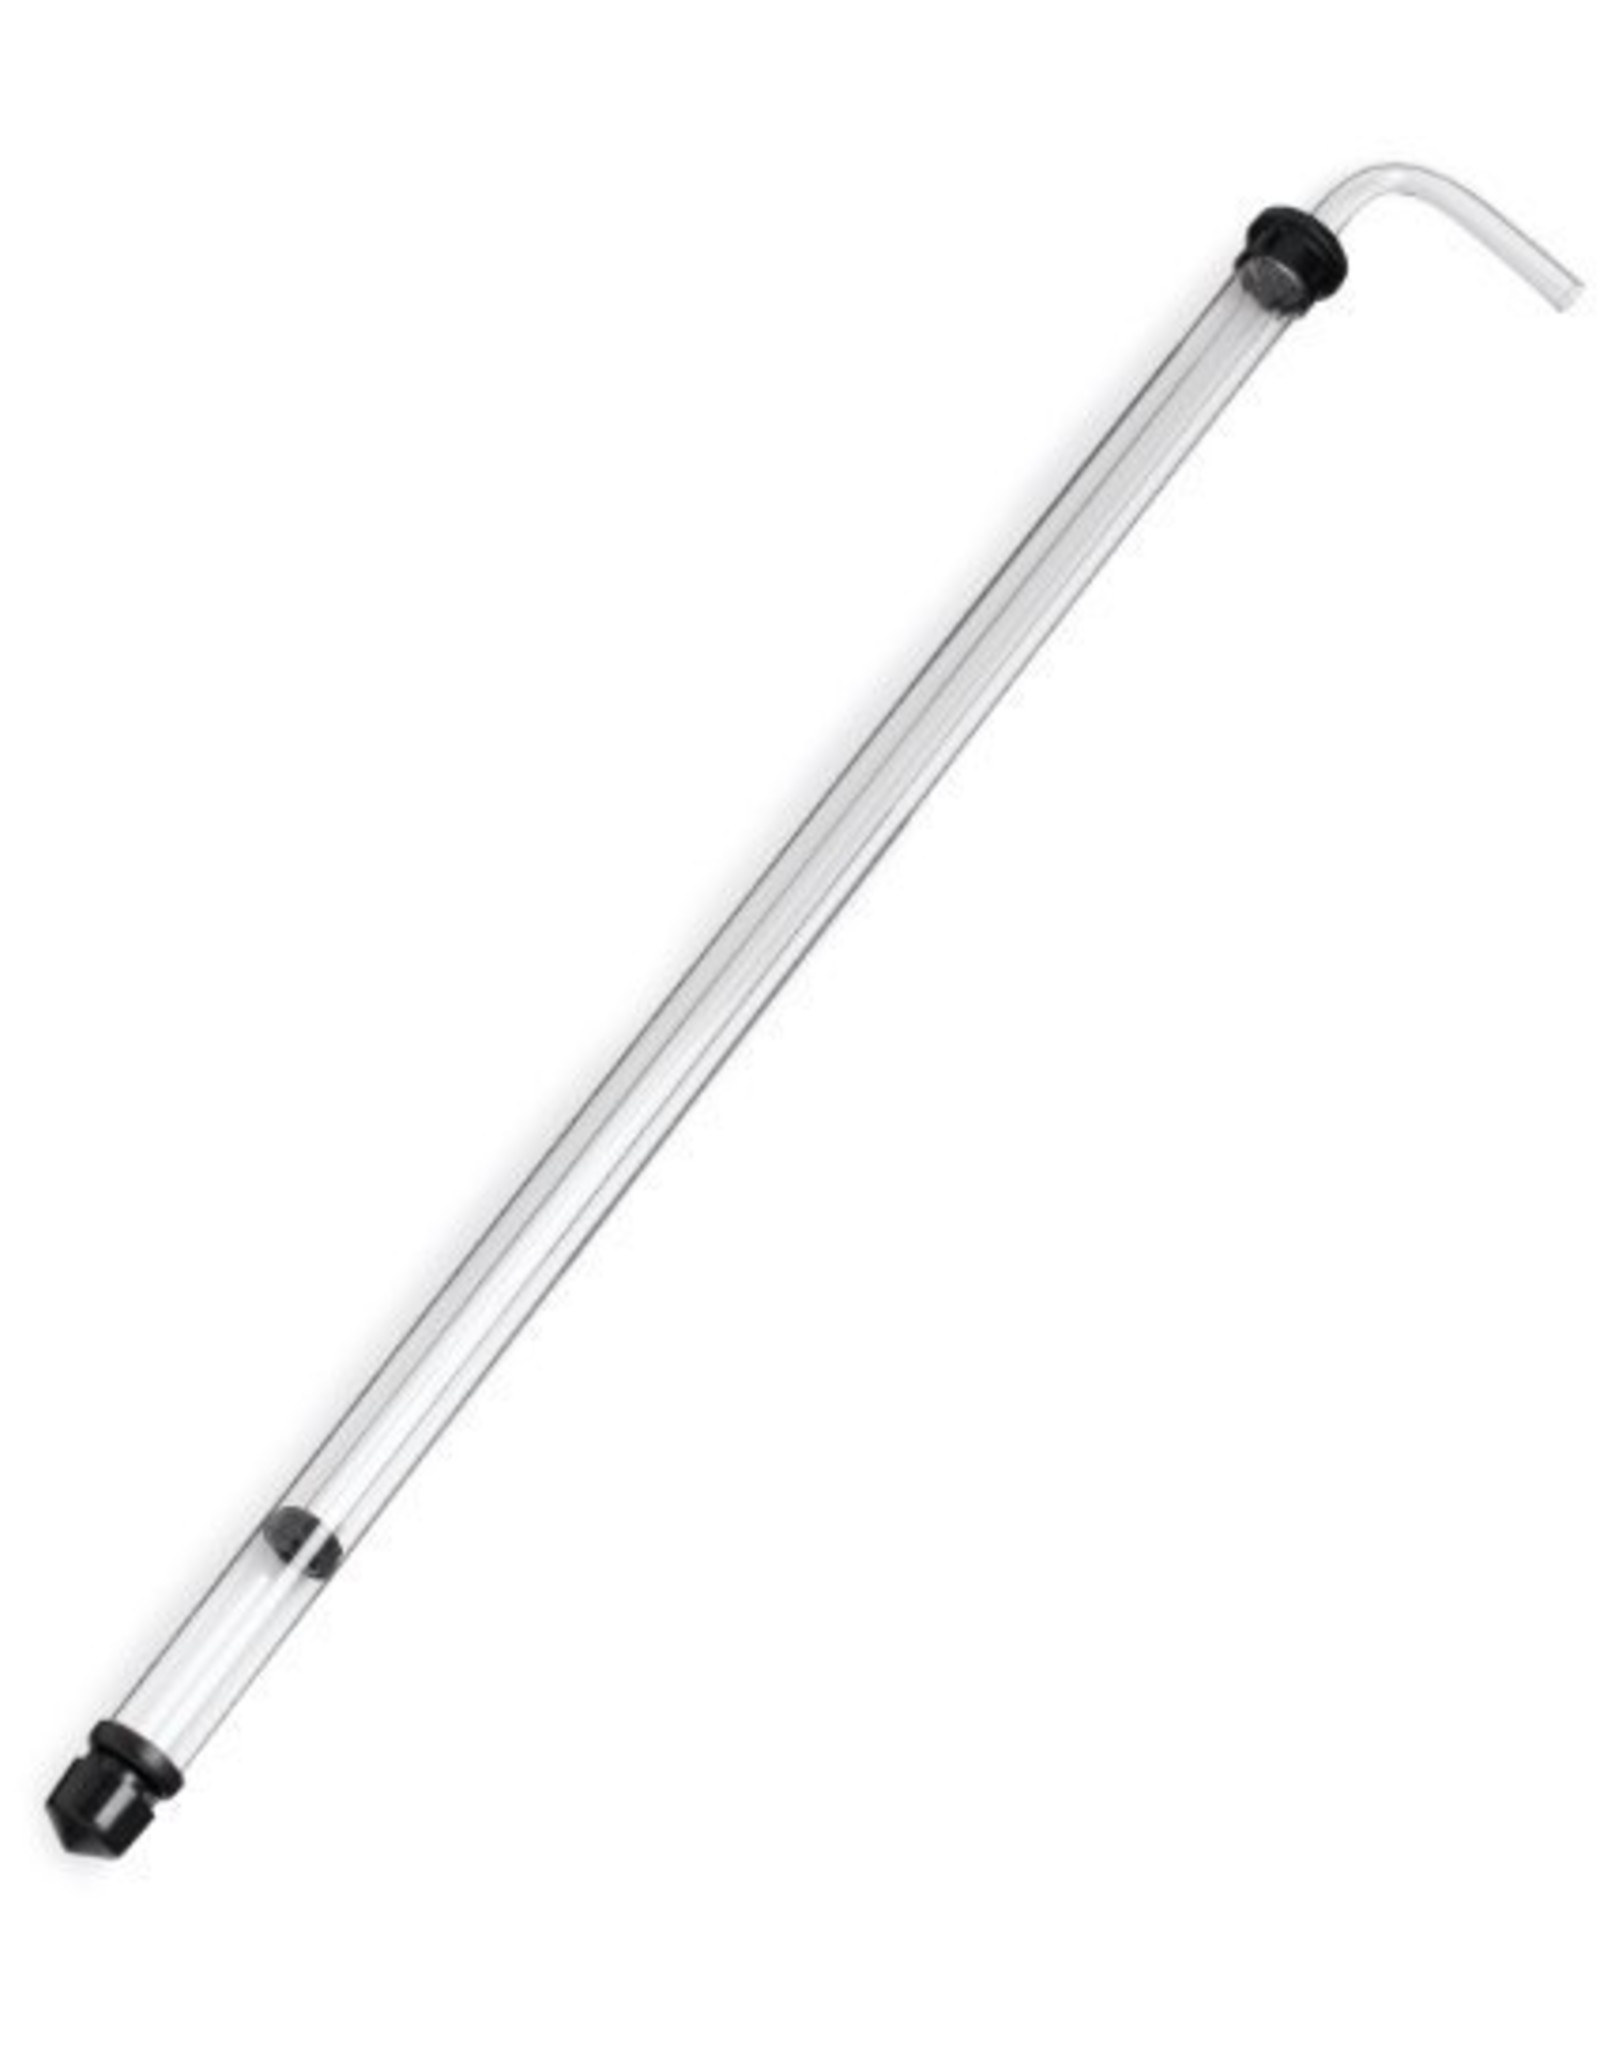 Auto Siphon 1/2 Inch large